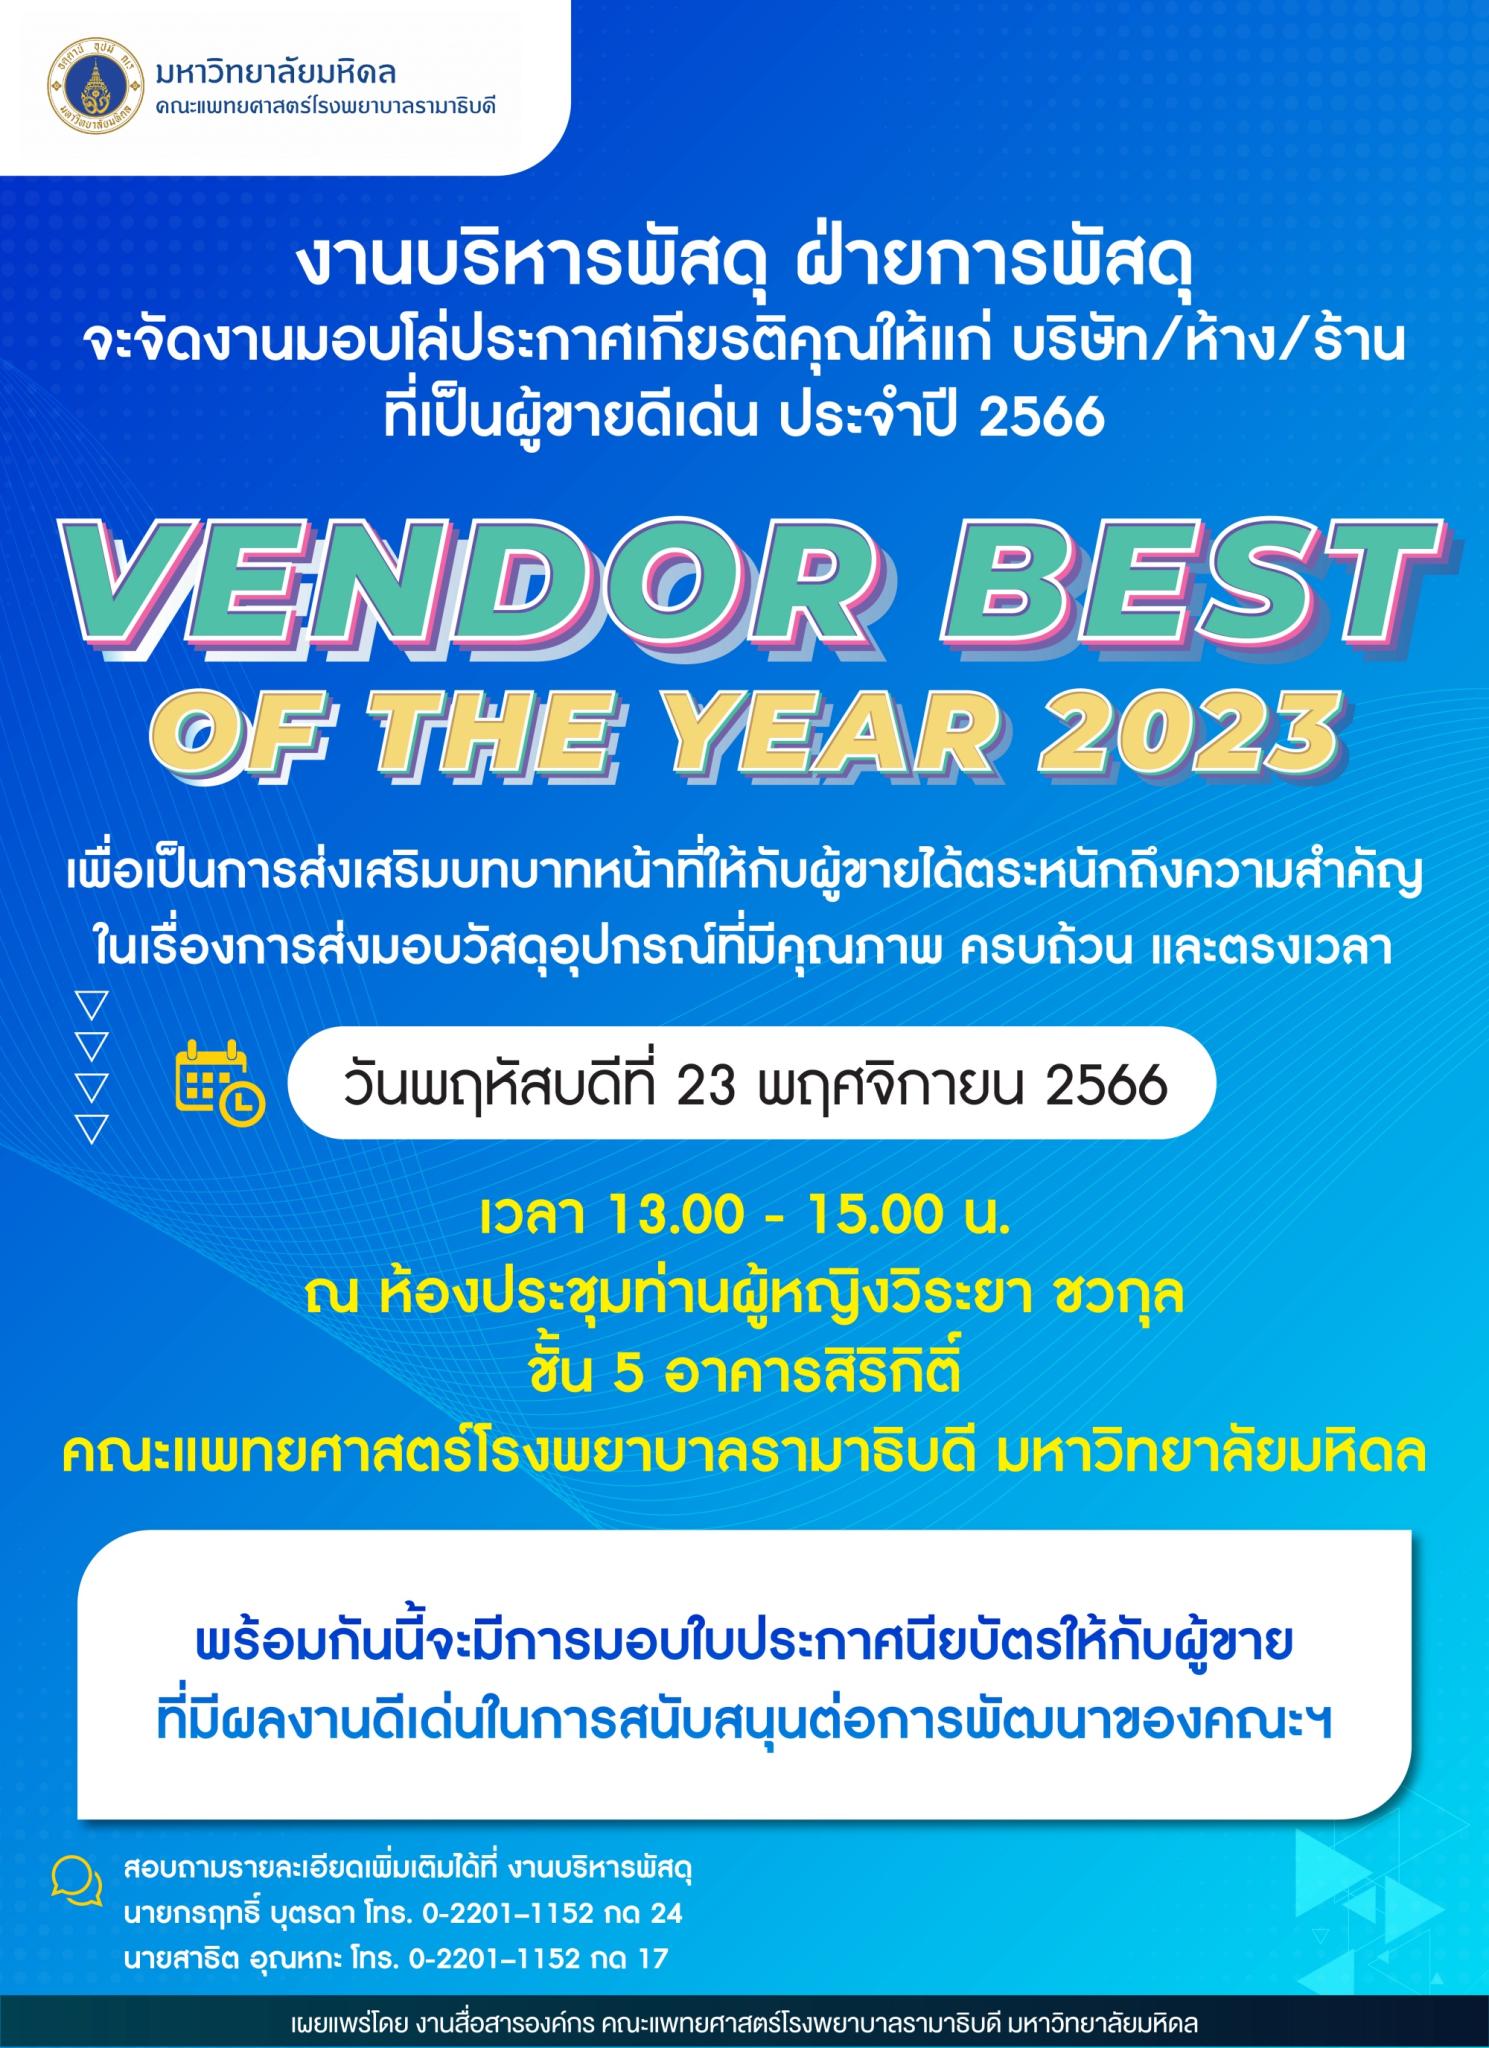 VENDOR BEST OF THE YEAR 2023